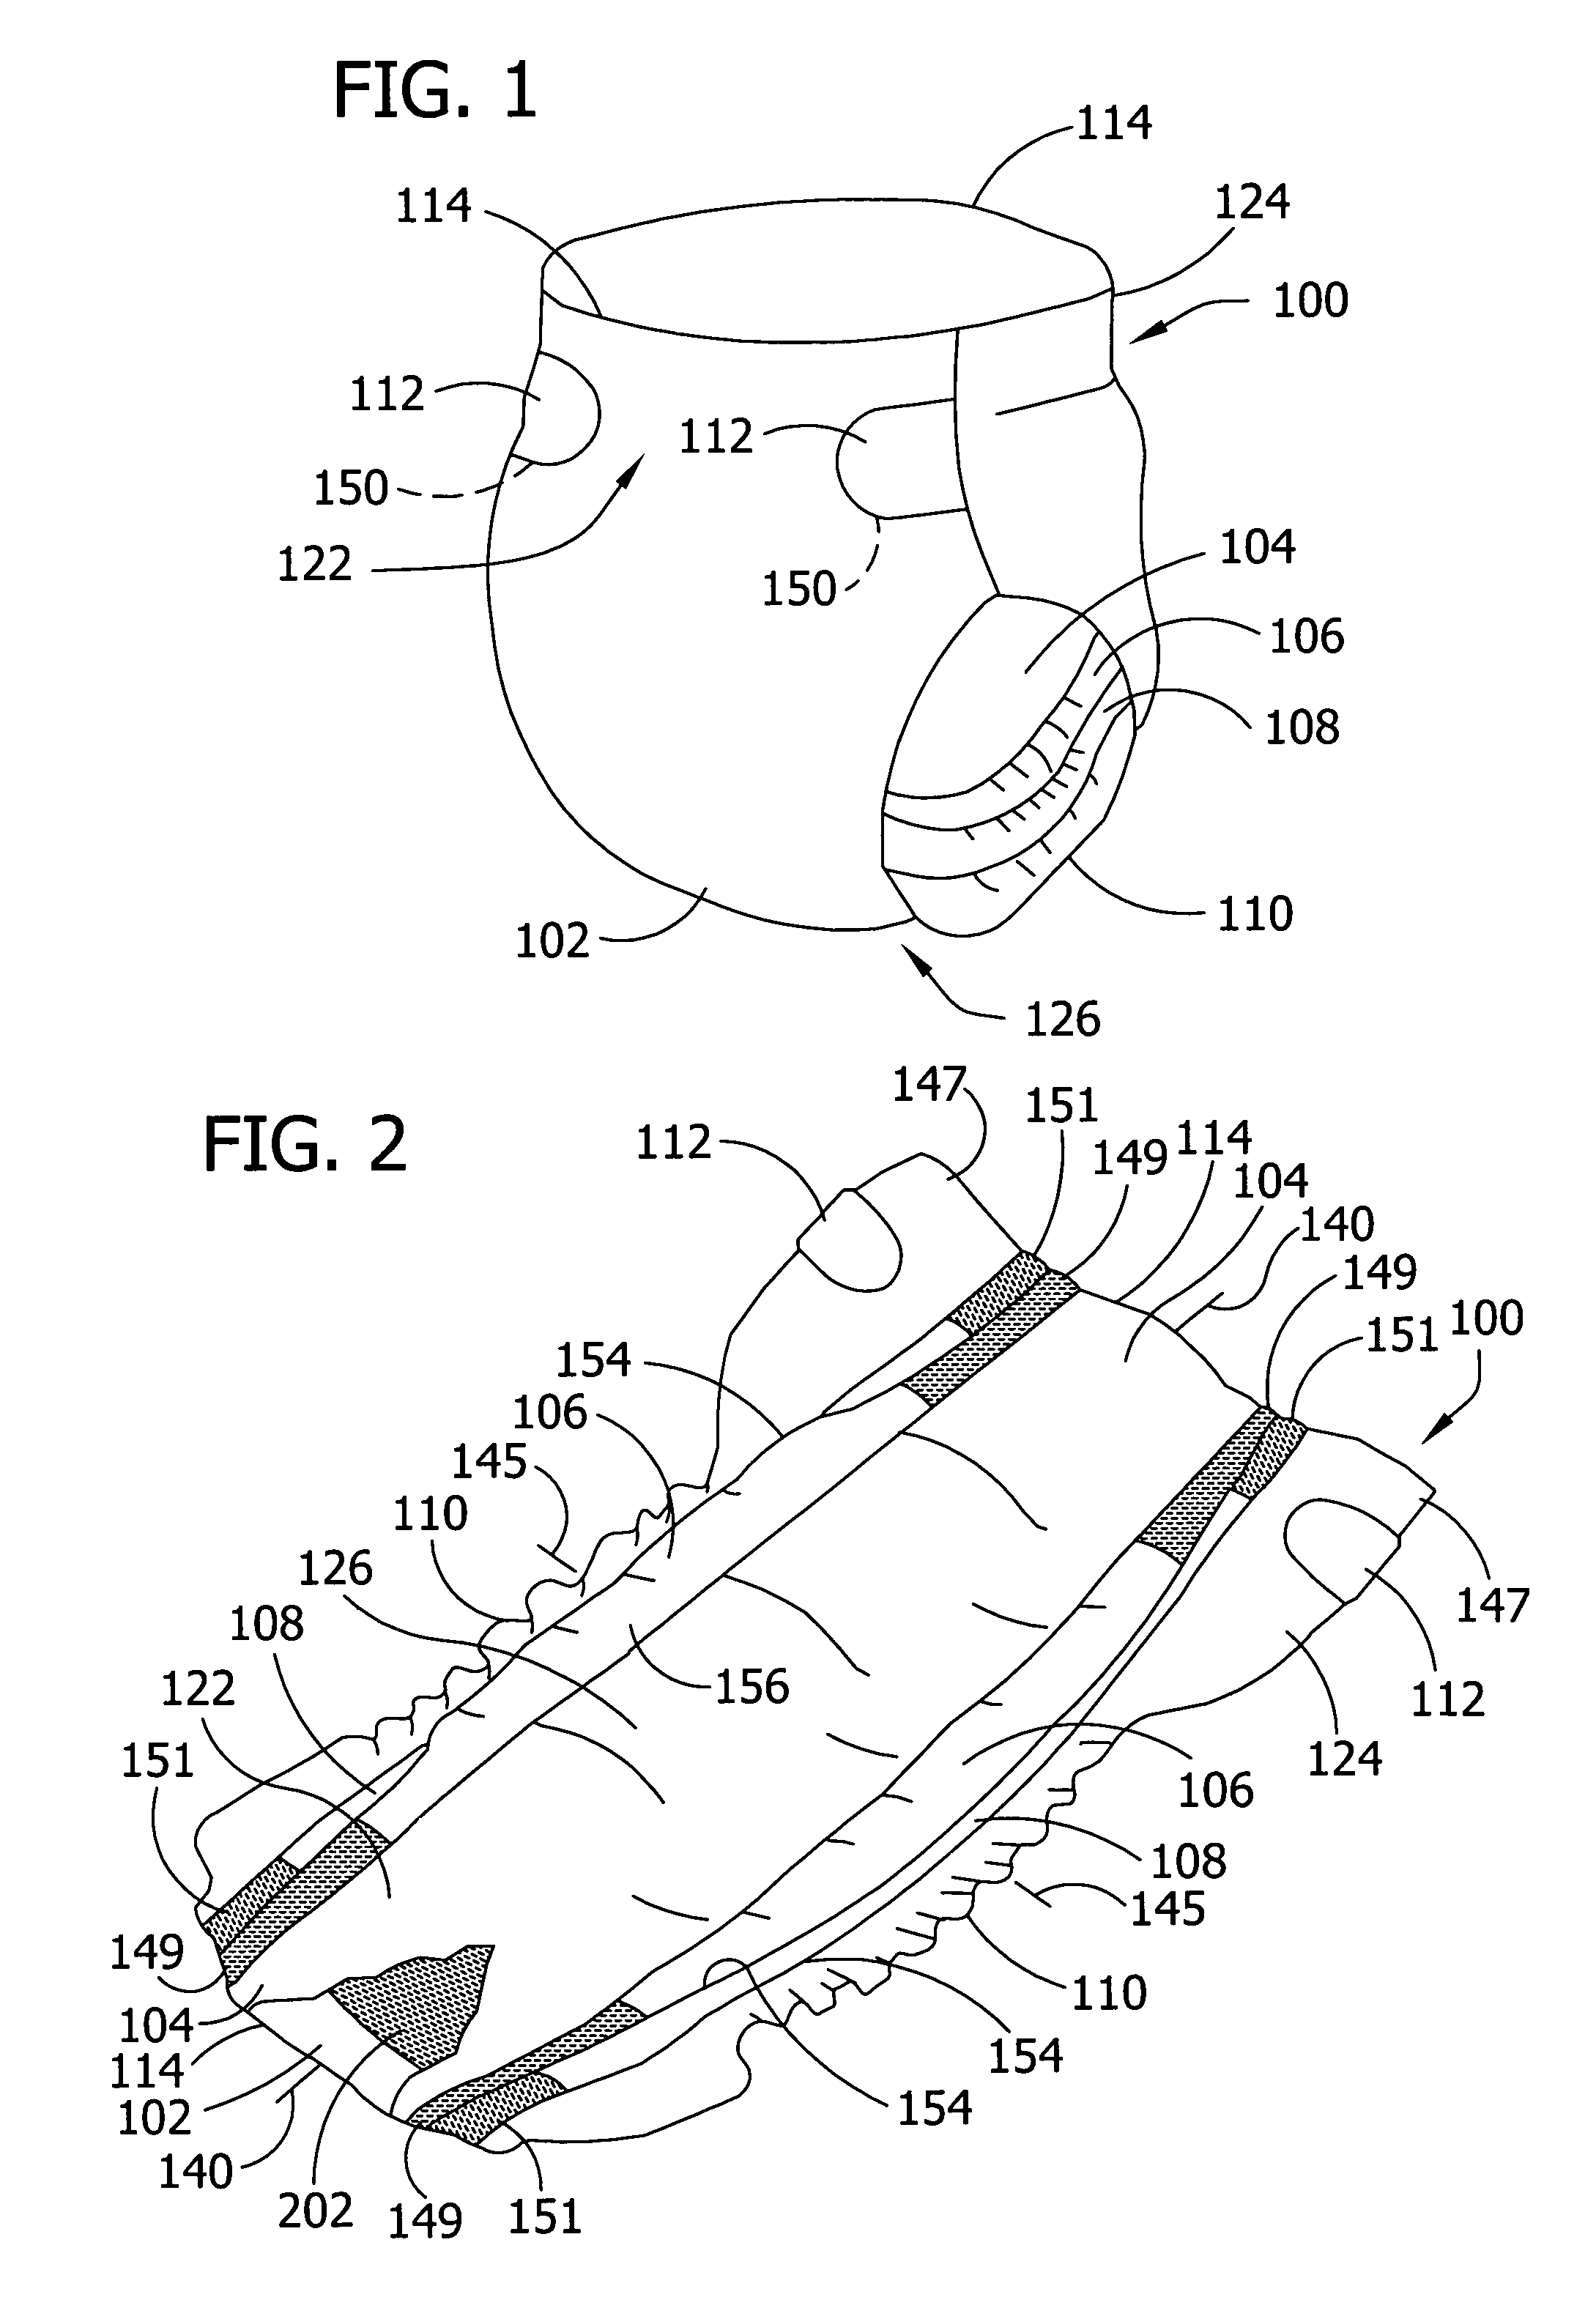 Absorbent garment with dual containment flaps